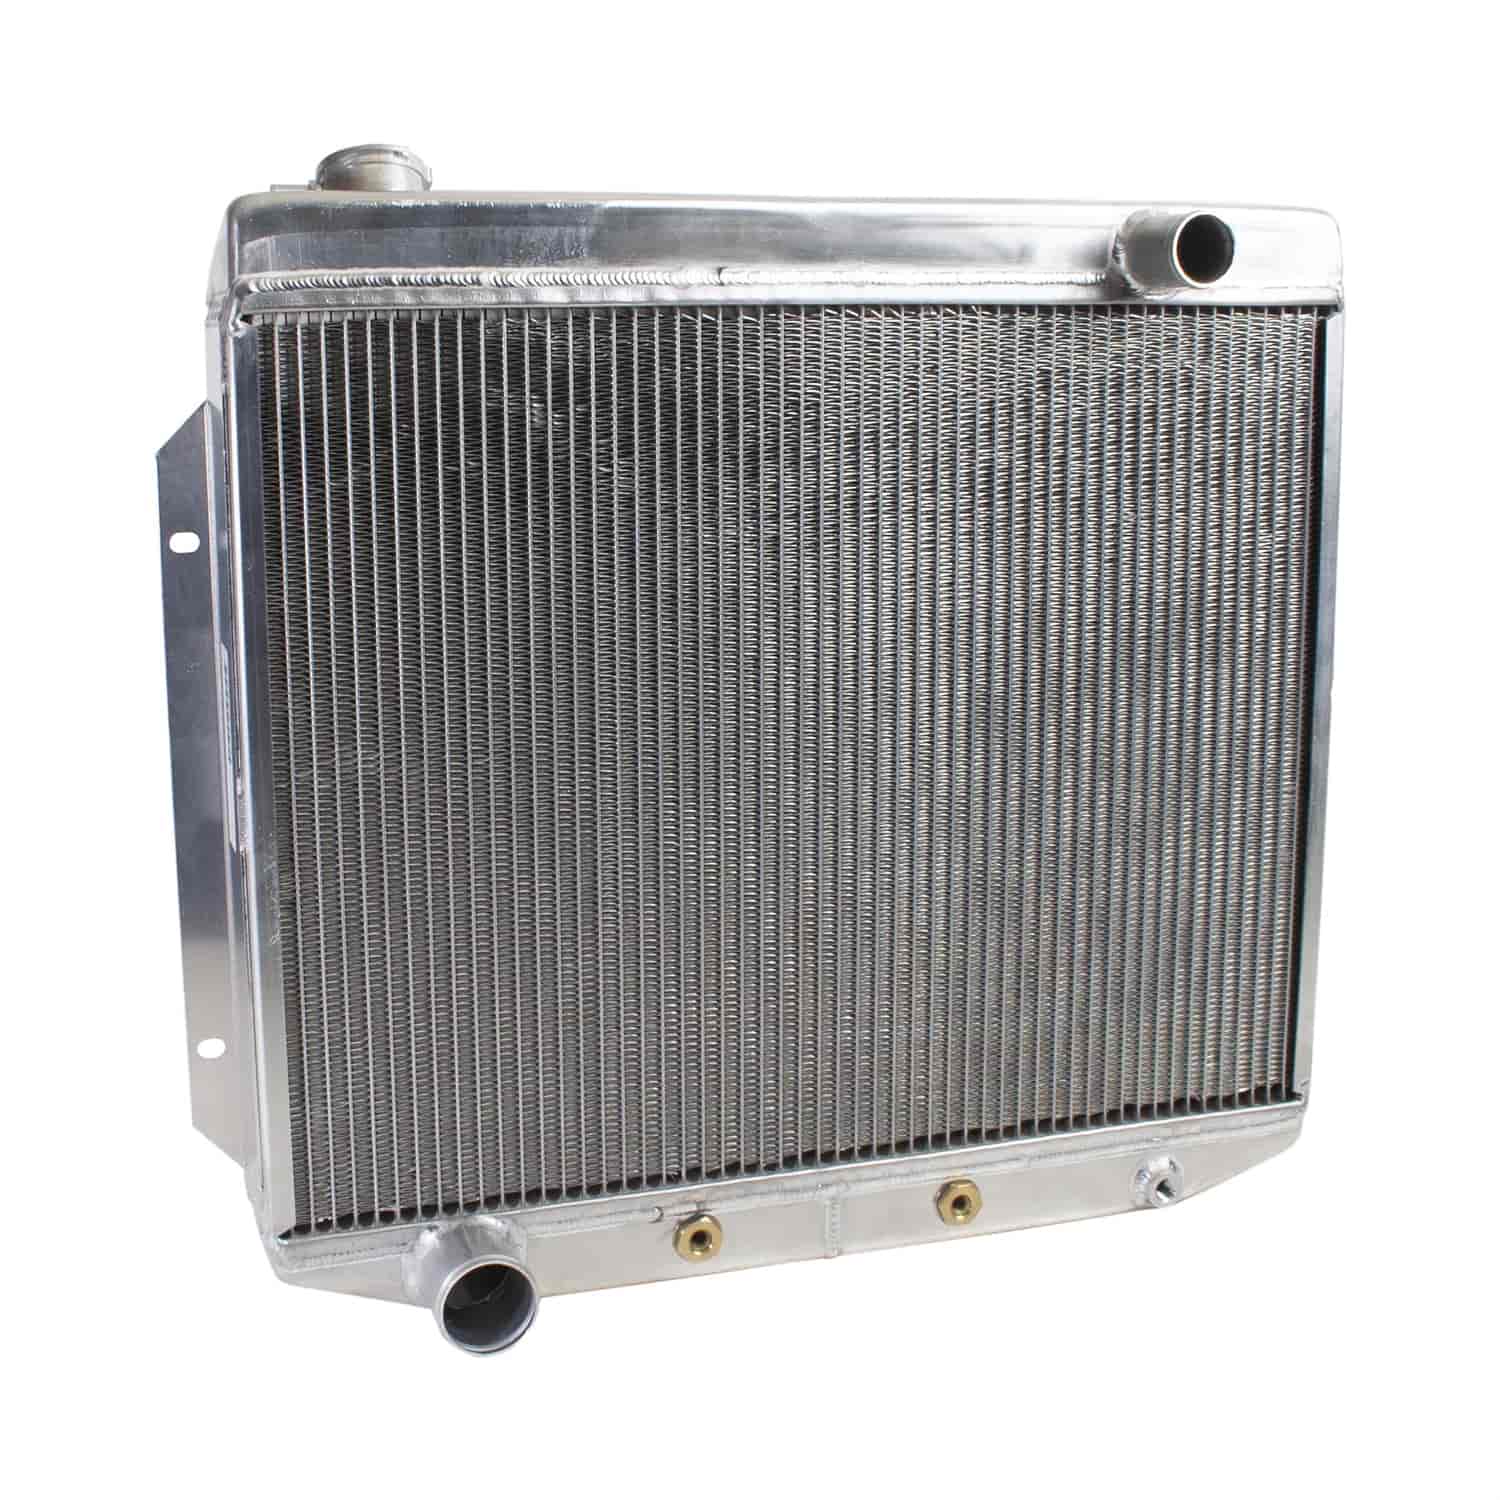 ExactFit Radiator for 1957-1959 Fairlane with Late Small